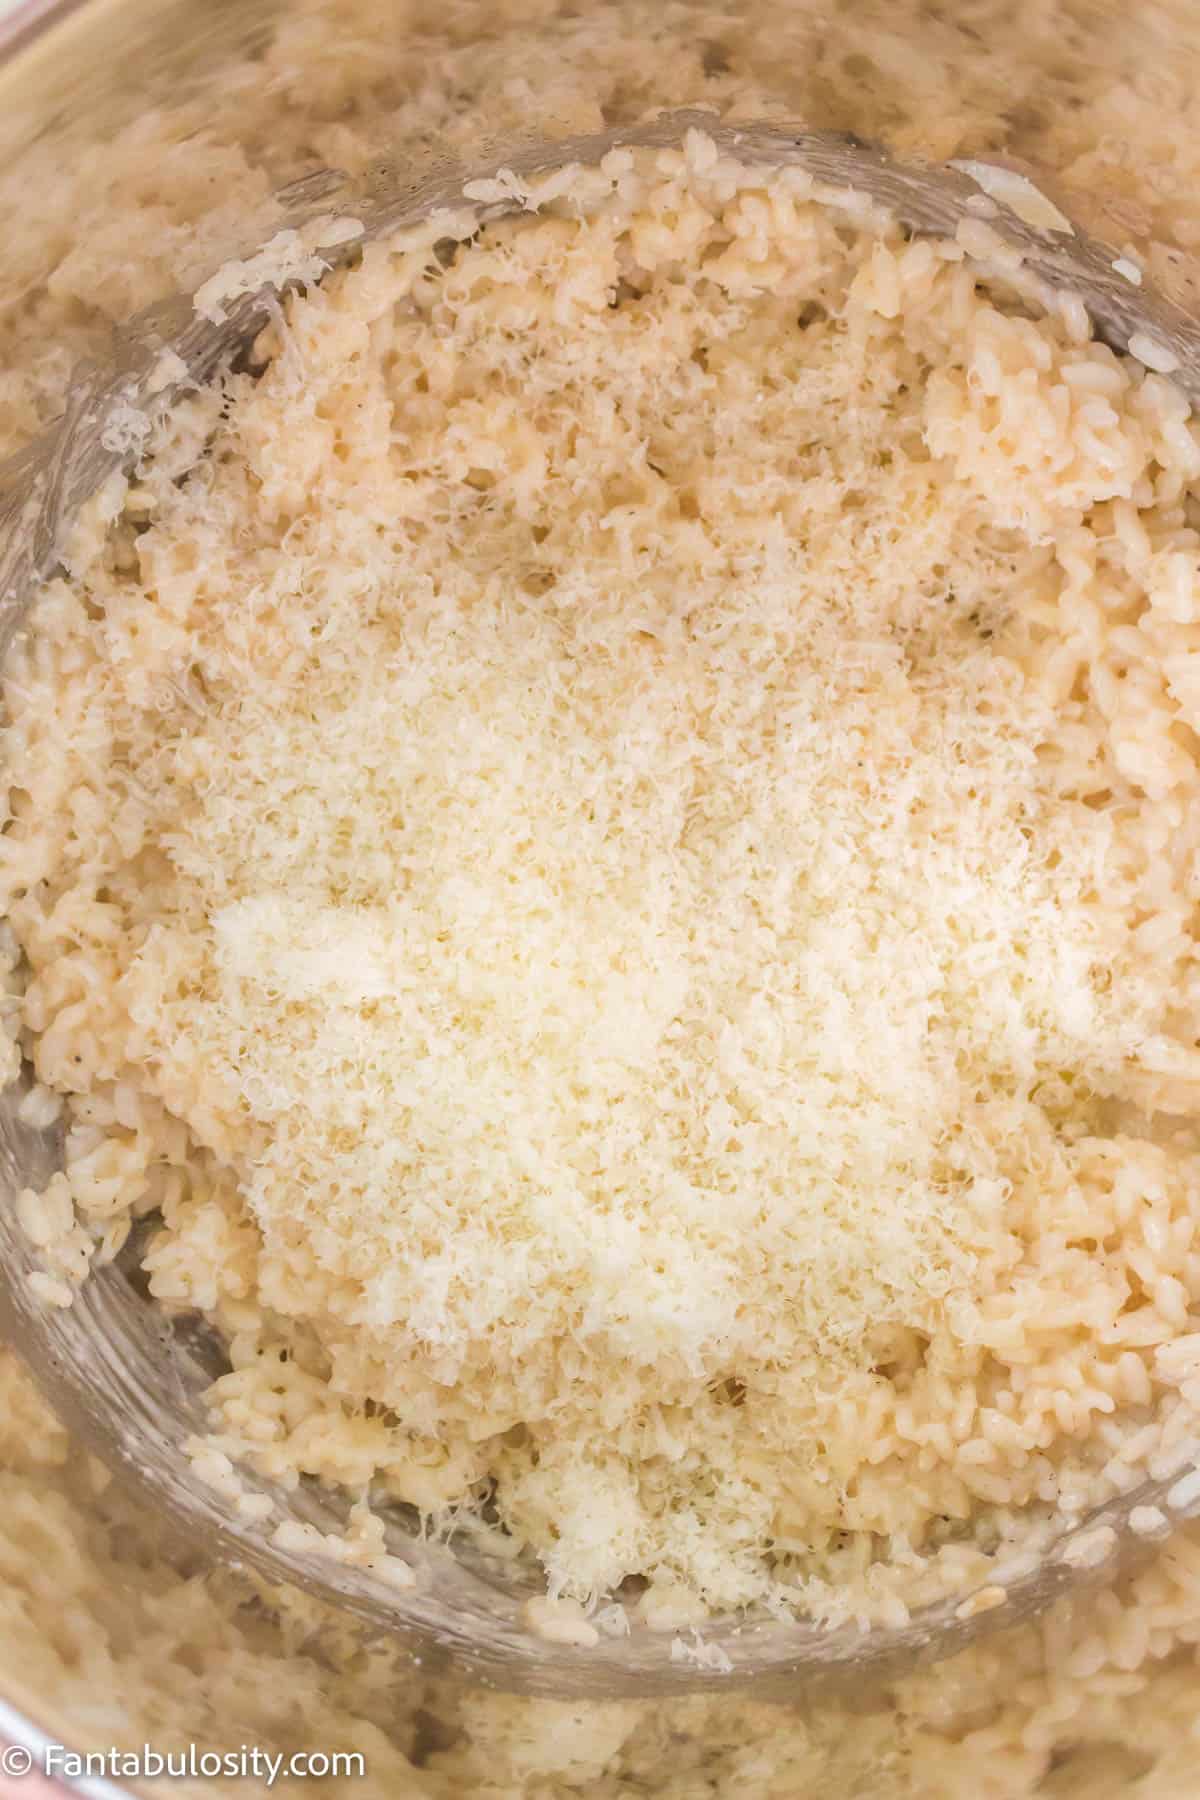 Parmesan cheese sprinkled on top of the cooked rice in the Instant Pot.